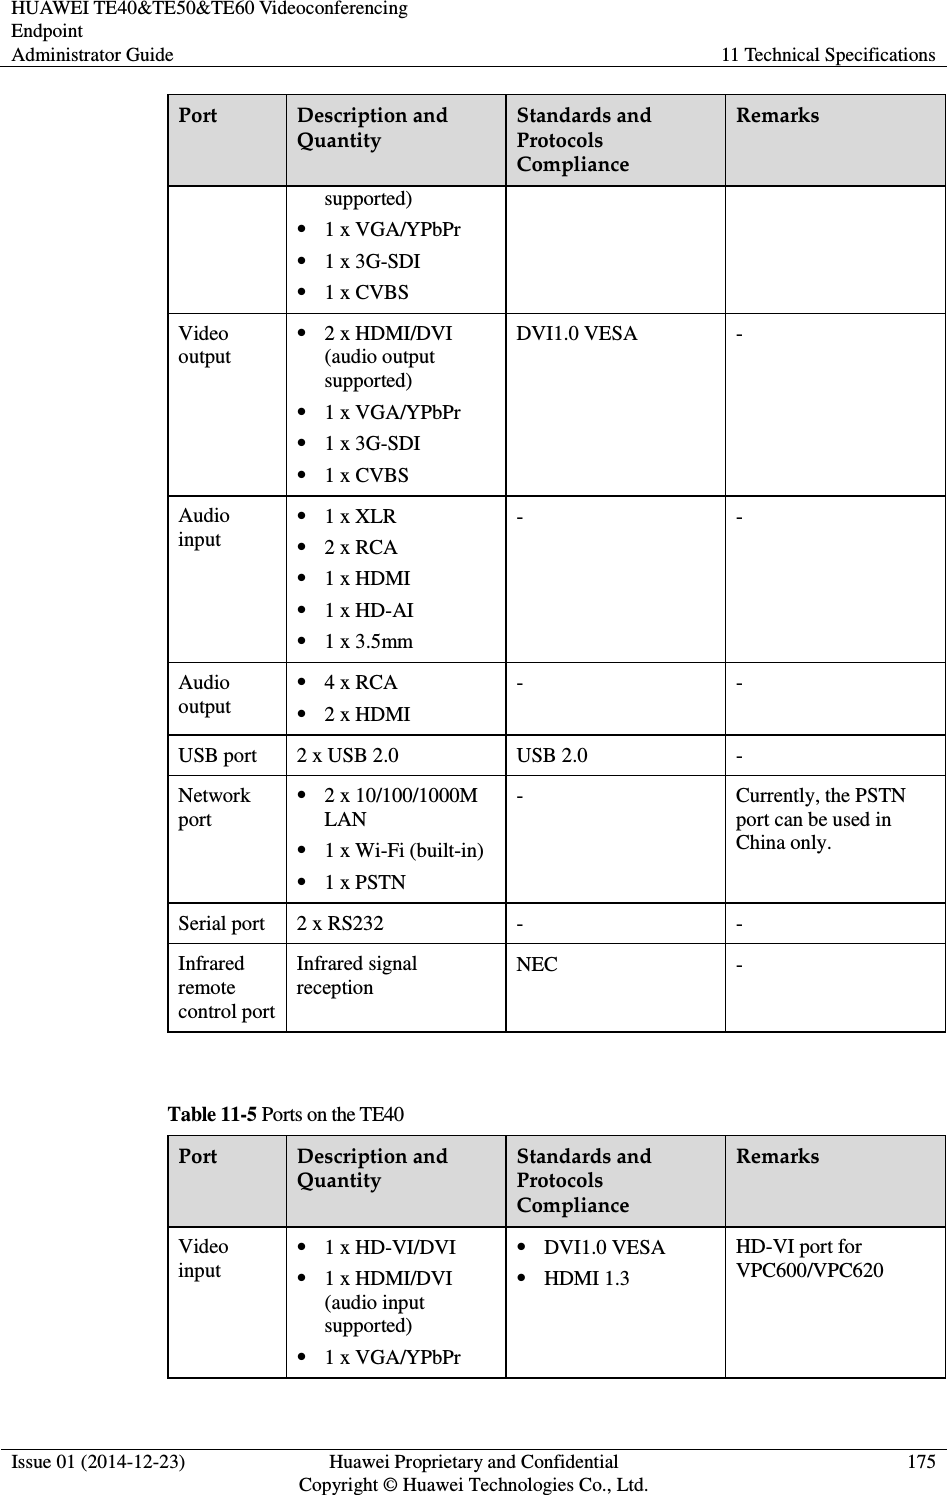 HUAWEI TE40&amp;TE50&amp;TE60 Videoconferencing Endpoint Administrator Guide  11 Technical Specifications  Issue 01 (2014-12-23)  Huawei Proprietary and Confidential                                     Copyright © Huawei Technologies Co., Ltd. 175  Port  Description and Quantity Standards and Protocols Compliance Remarks supported)  1 x VGA/YPbPr  1 x 3G-SDI  1 x CVBS Video output  2 x HDMI/DVI (audio output supported)  1 x VGA/YPbPr  1 x 3G-SDI  1 x CVBS DVI1.0 VESA  - Audio input  1 x XLR  2 x RCA  1 x HDMI  1 x HD-AI  1 x 3.5mm -  - Audio output  4 x RCA  2 x HDMI -  - USB port  2 x USB 2.0  USB 2.0  - Network port  2 x 10/100/1000M LAN  1 x Wi-Fi (built-in)  1 x PSTN -  Currently, the PSTN port can be used in China only. Serial port  2 x RS232  -  - Infrared remote control port Infrared signal reception NEC  -  Table 11-5 Ports on the TE40 Port  Description and Quantity Standards and Protocols Compliance Remarks Video input  1 x HD-VI/DVI  1 x HDMI/DVI (audio input supported)  1 x VGA/YPbPr  DVI1.0 VESA  HDMI 1.3 HD-VI port for VPC600/VPC620 